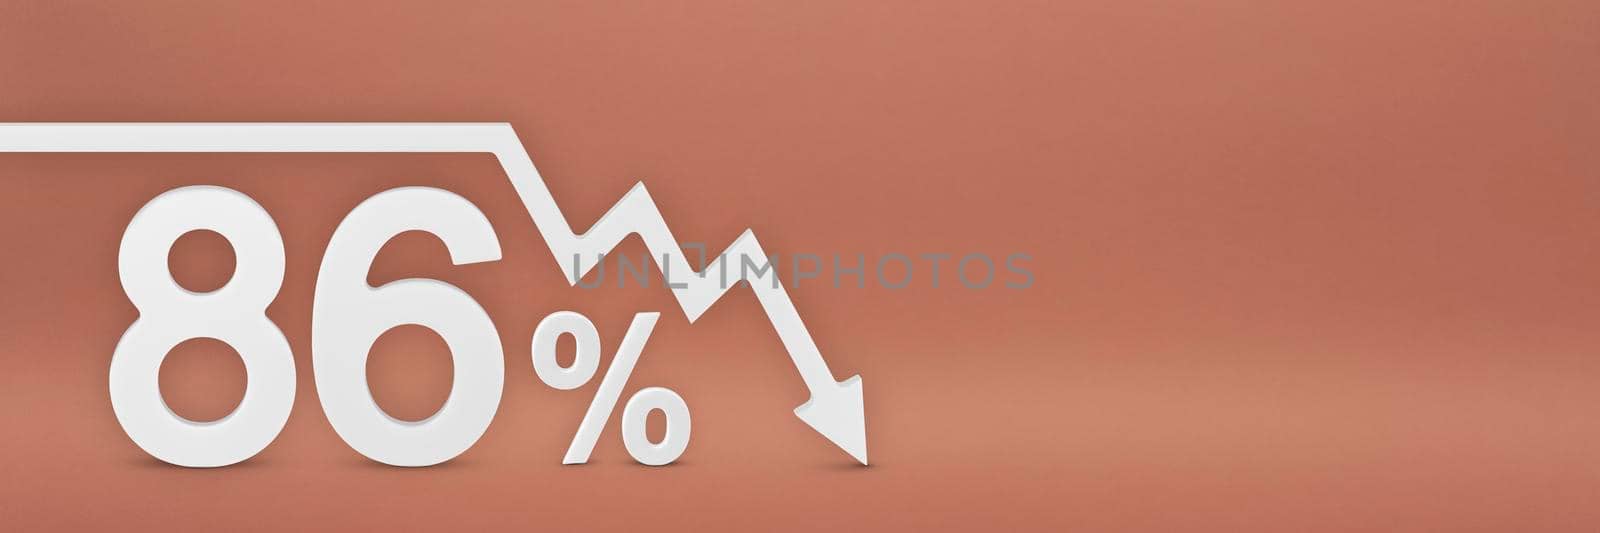 eighty-six percent, the arrow on the graph is pointing down. Stock market crash, bear market, inflation.Economic collapse, collapse of stocks.3d banner,86 percent discount sign on a red background